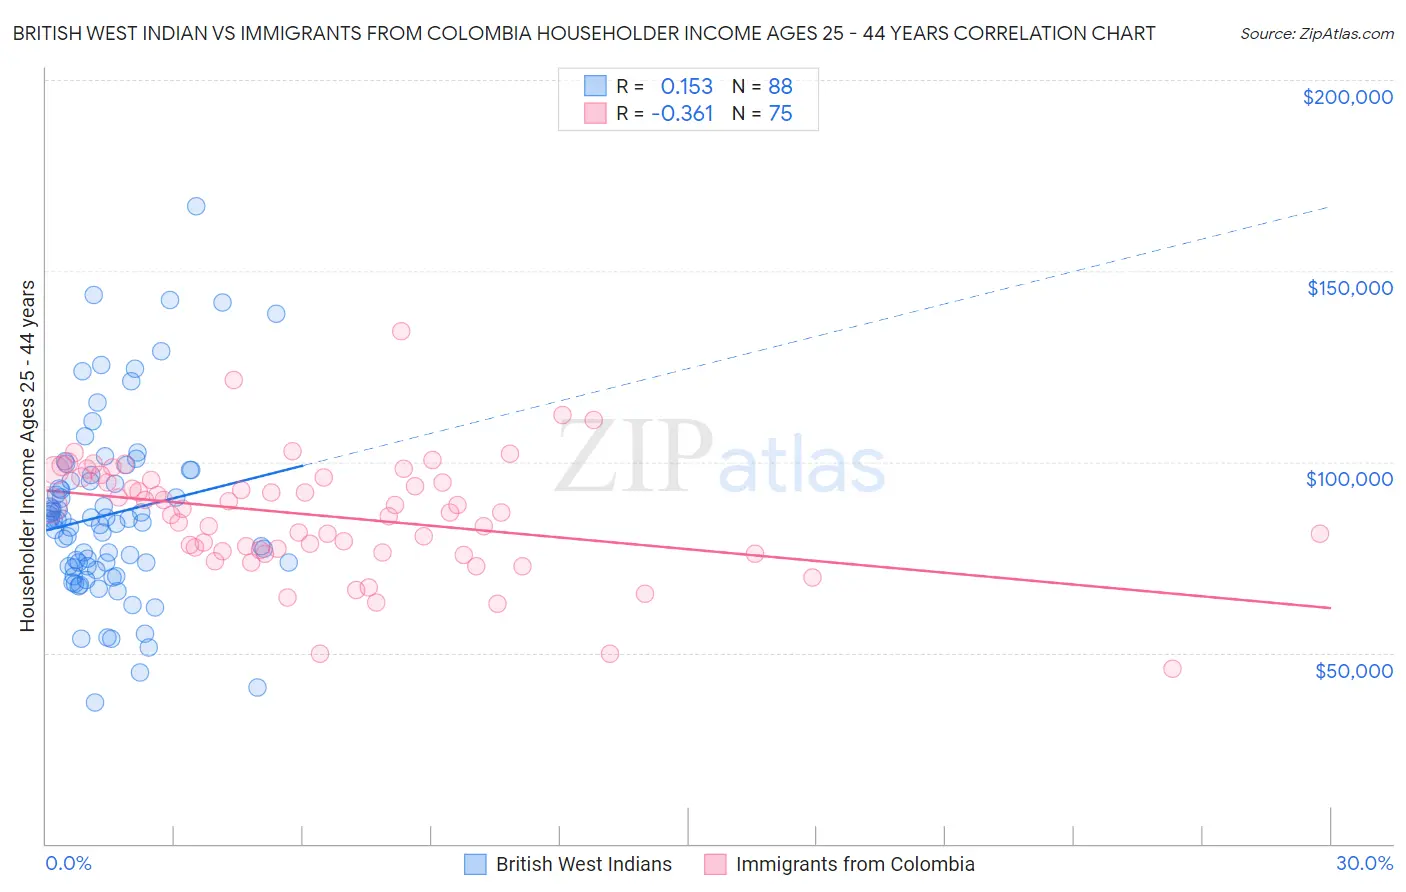 British West Indian vs Immigrants from Colombia Householder Income Ages 25 - 44 years